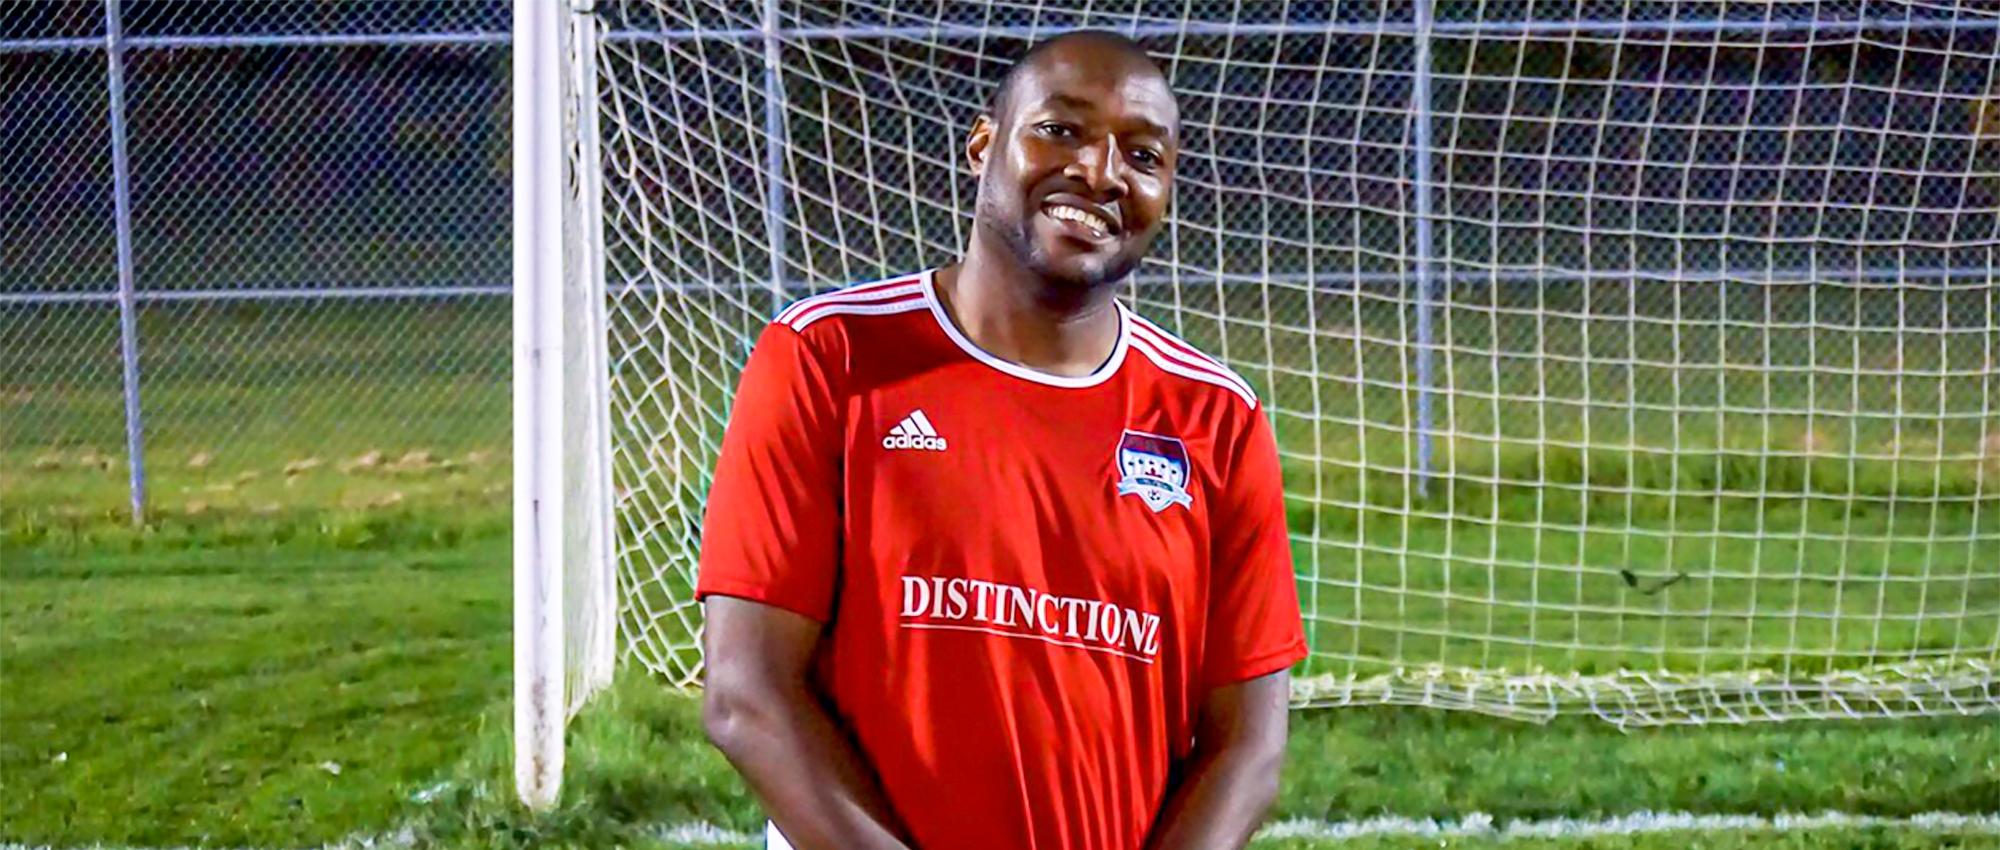 Featured image of Dujon Donaldson wearing a red soccer uniform in front of a soccer goal post